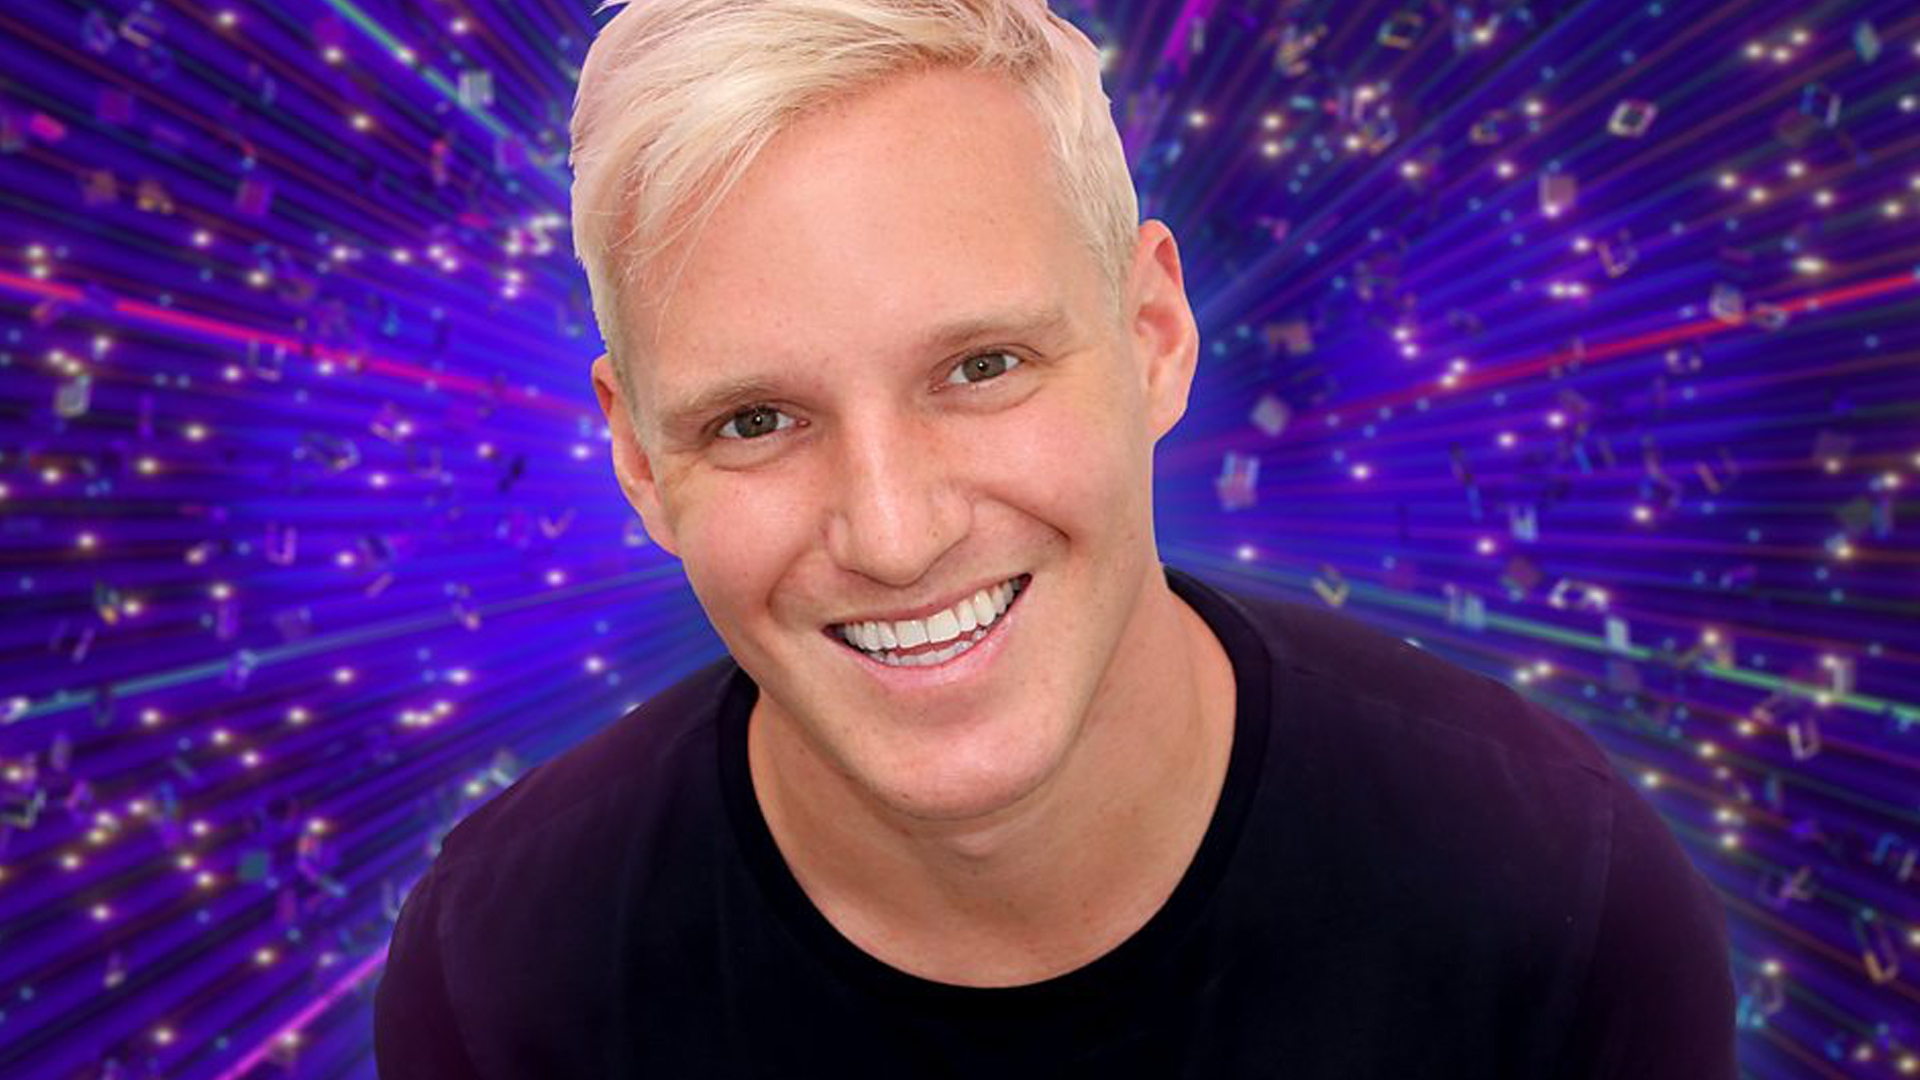 Strictly Come Dancing contestant Jamie Laing